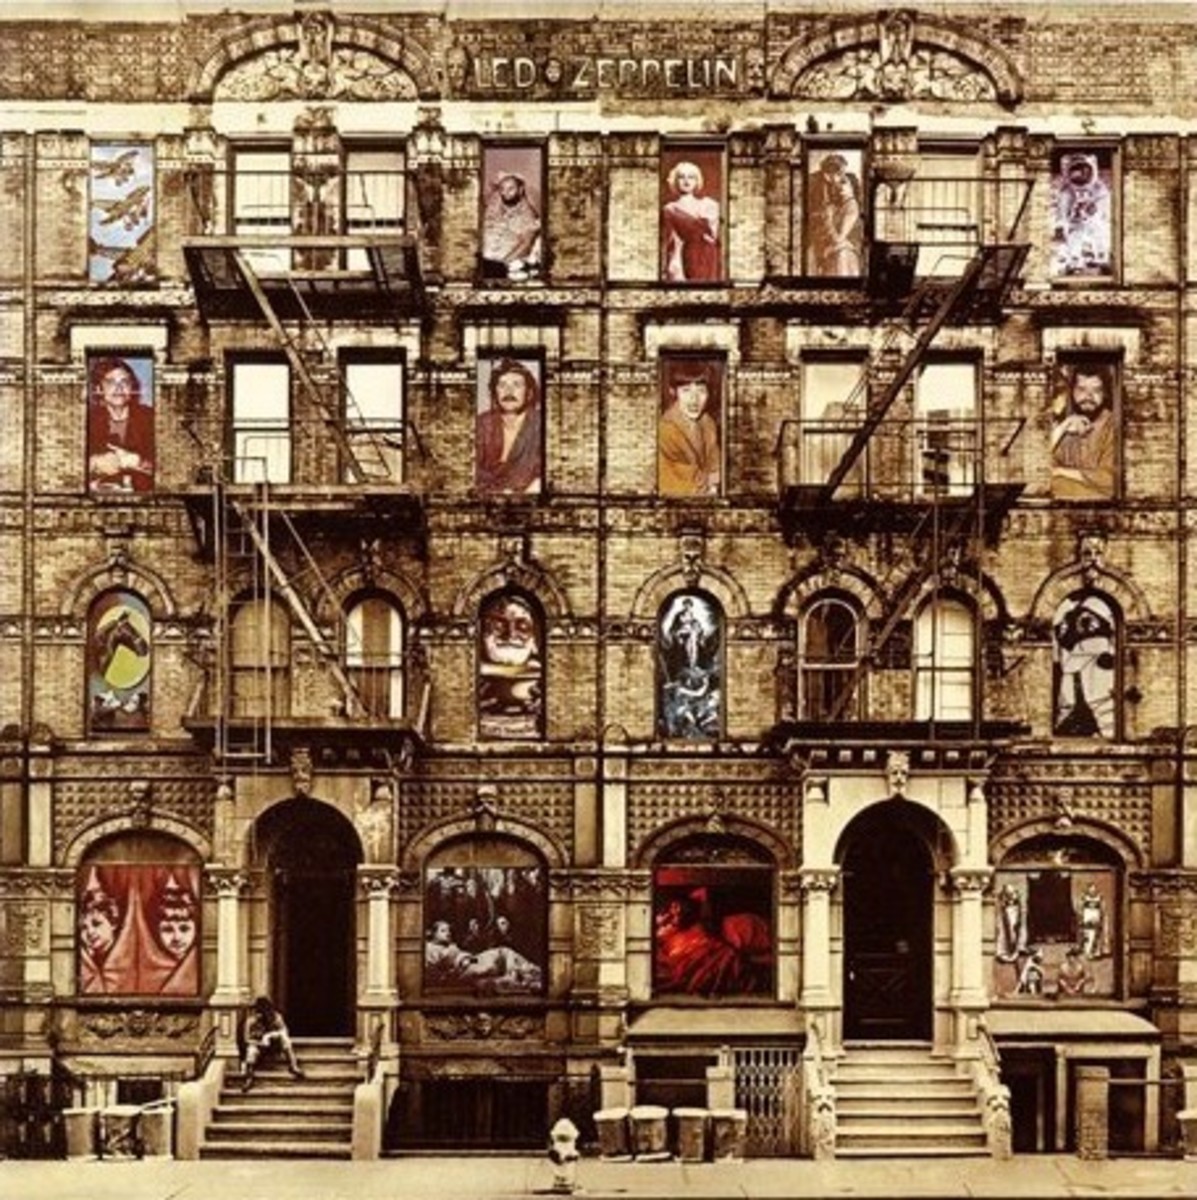 Led Zeppelin - Physical Graffiti Limited Edition Art Print by Peter Corriston